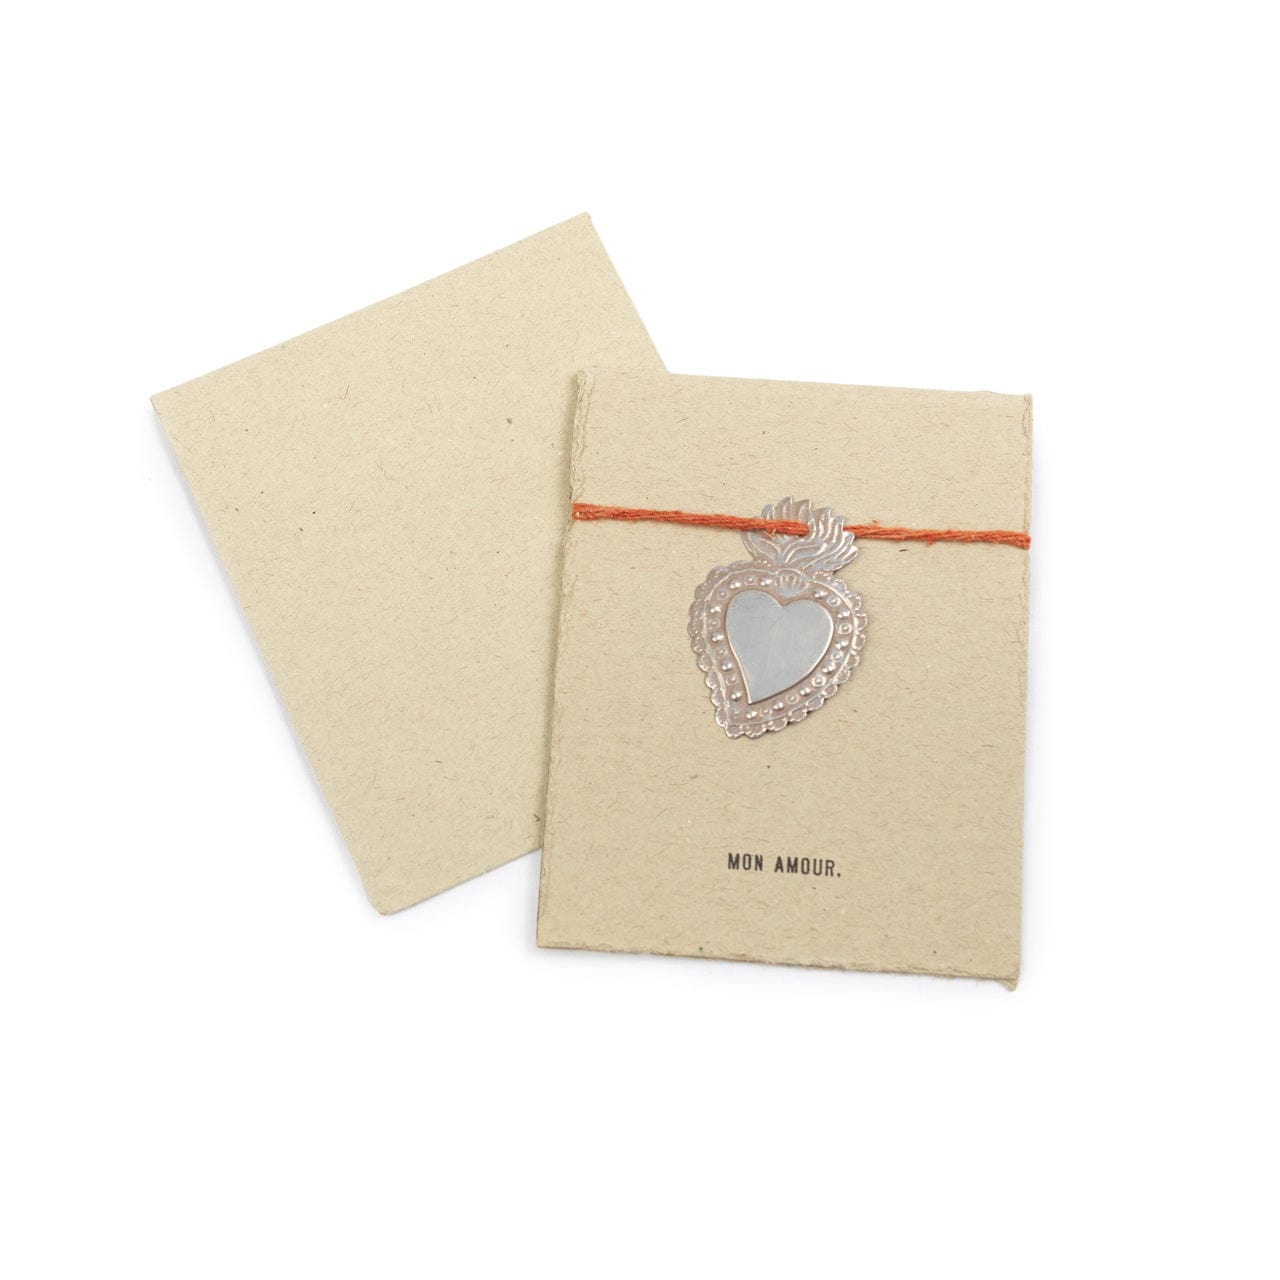 Milagro Heart Cards Sugarboo Designs Greeting Card Mon Amour